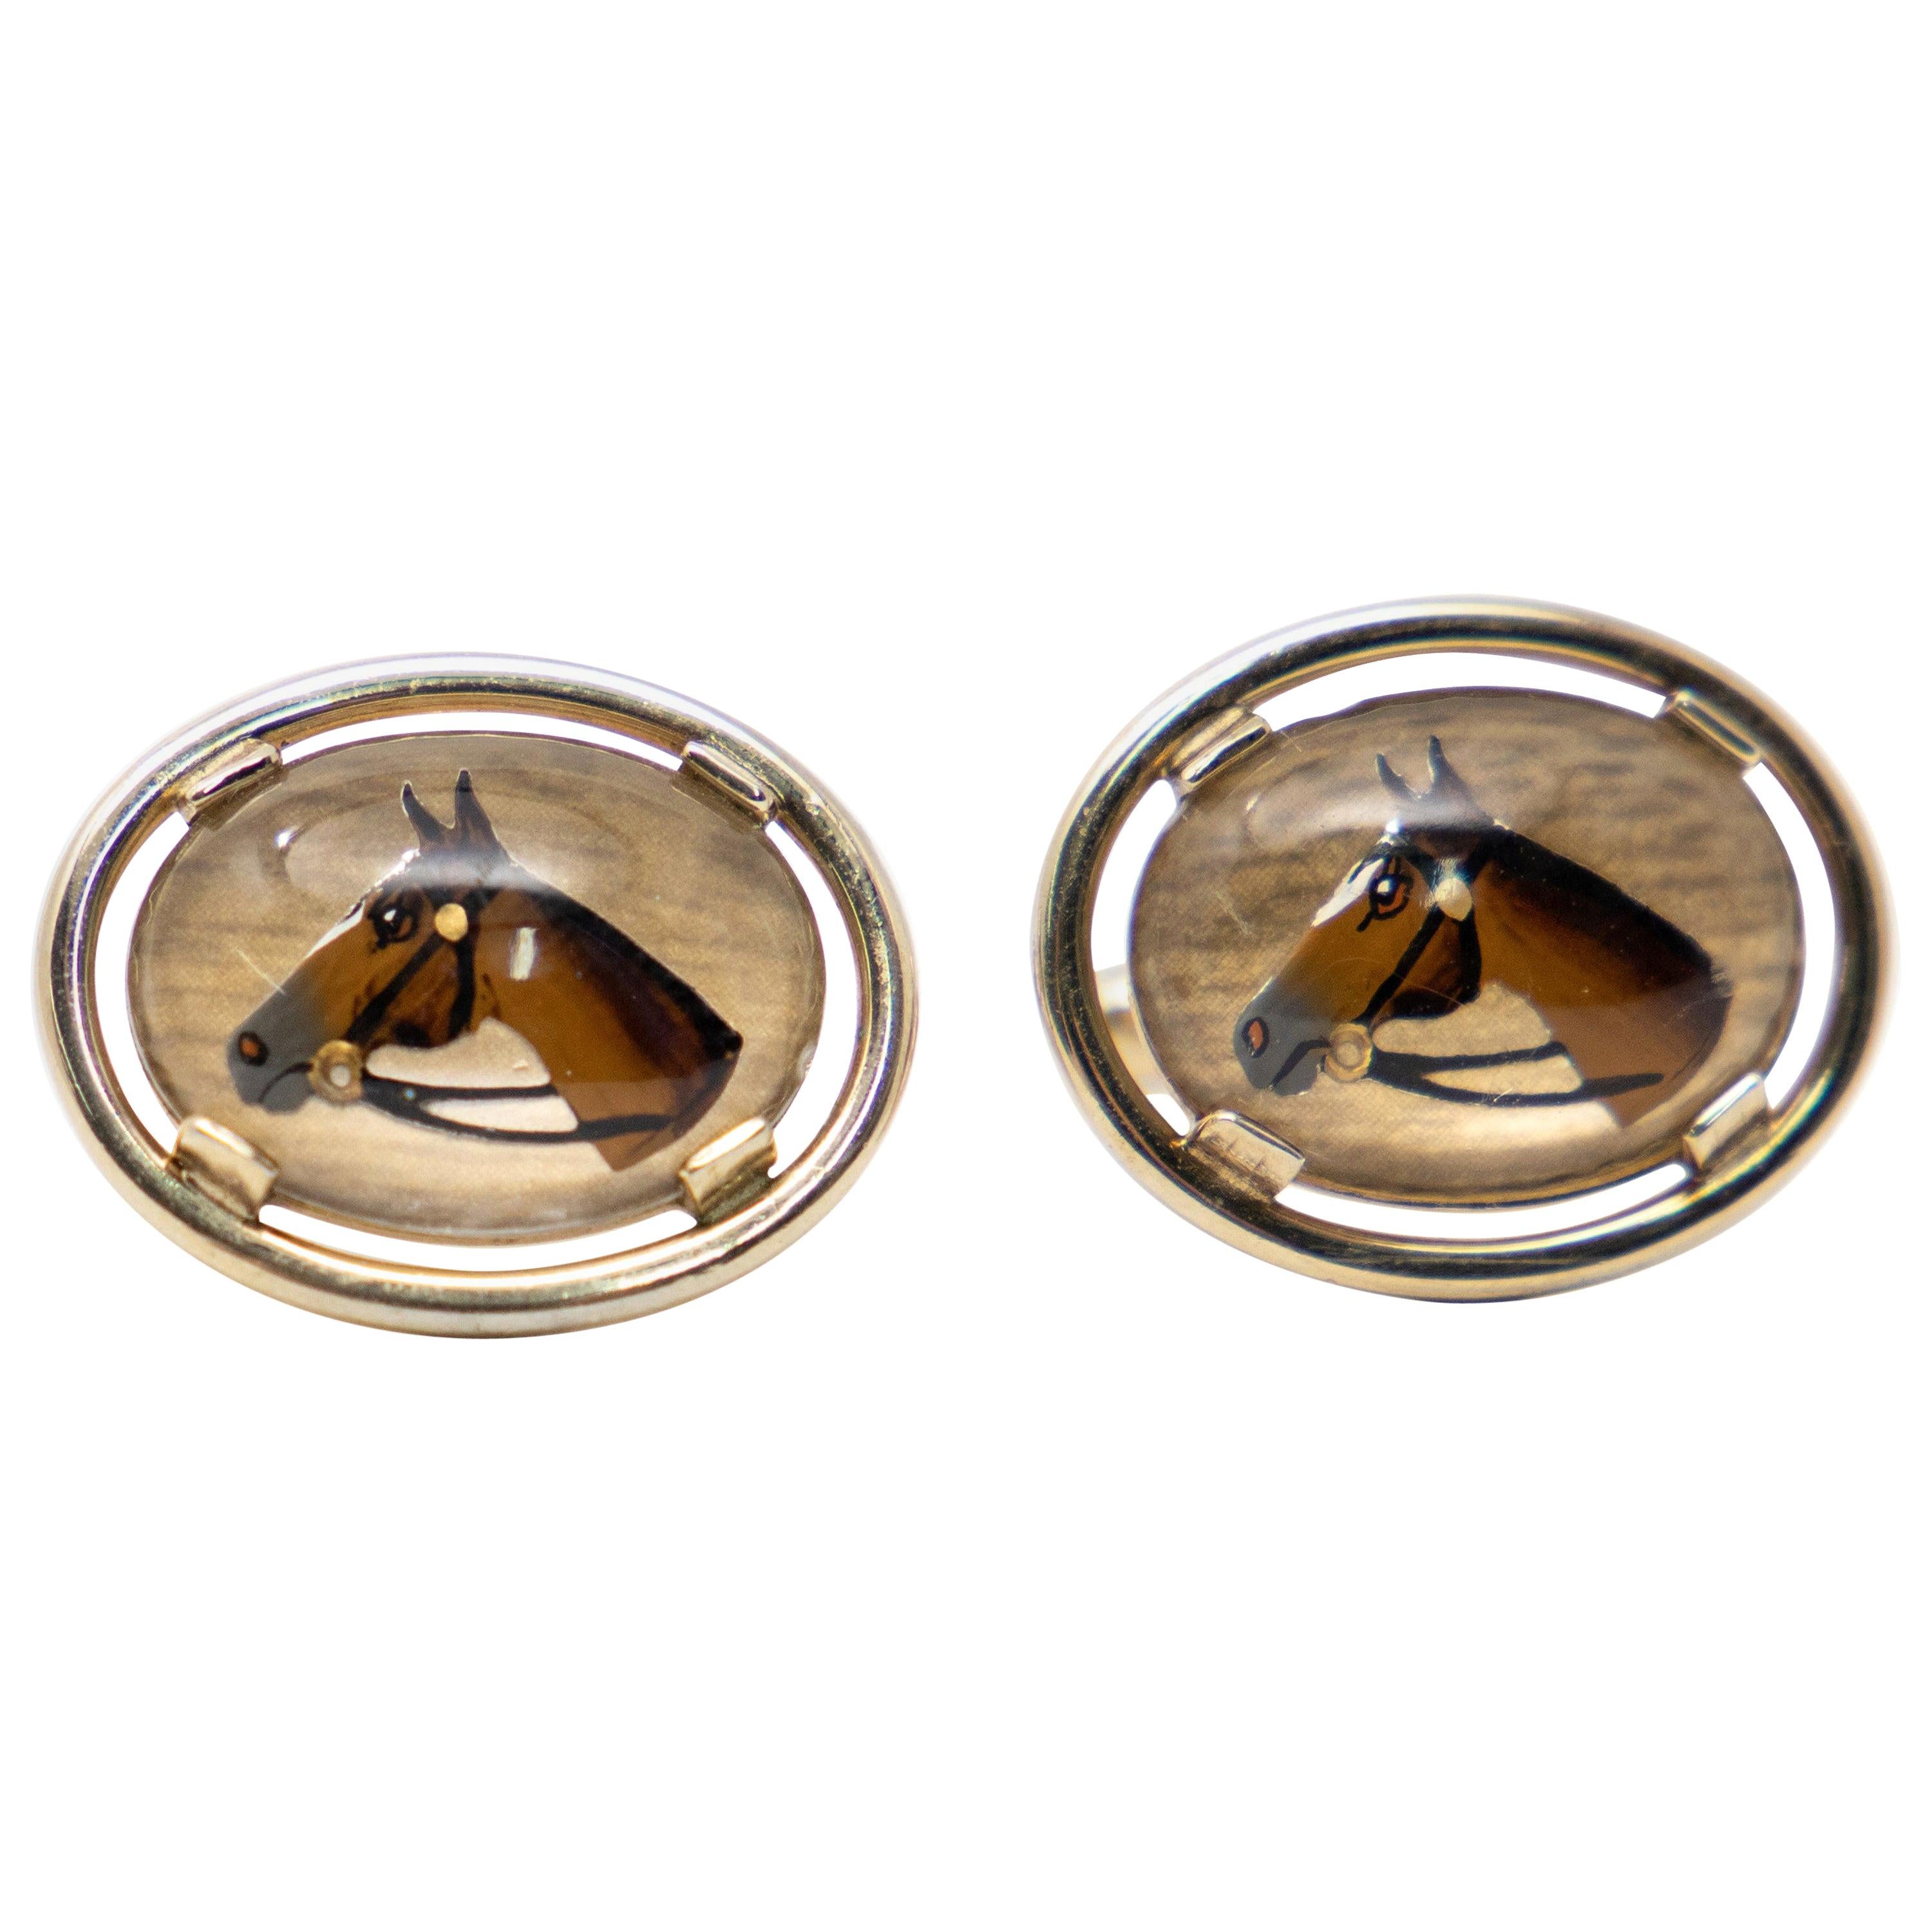 Cufflinks with Enameled Horse Head by Swank For Sale